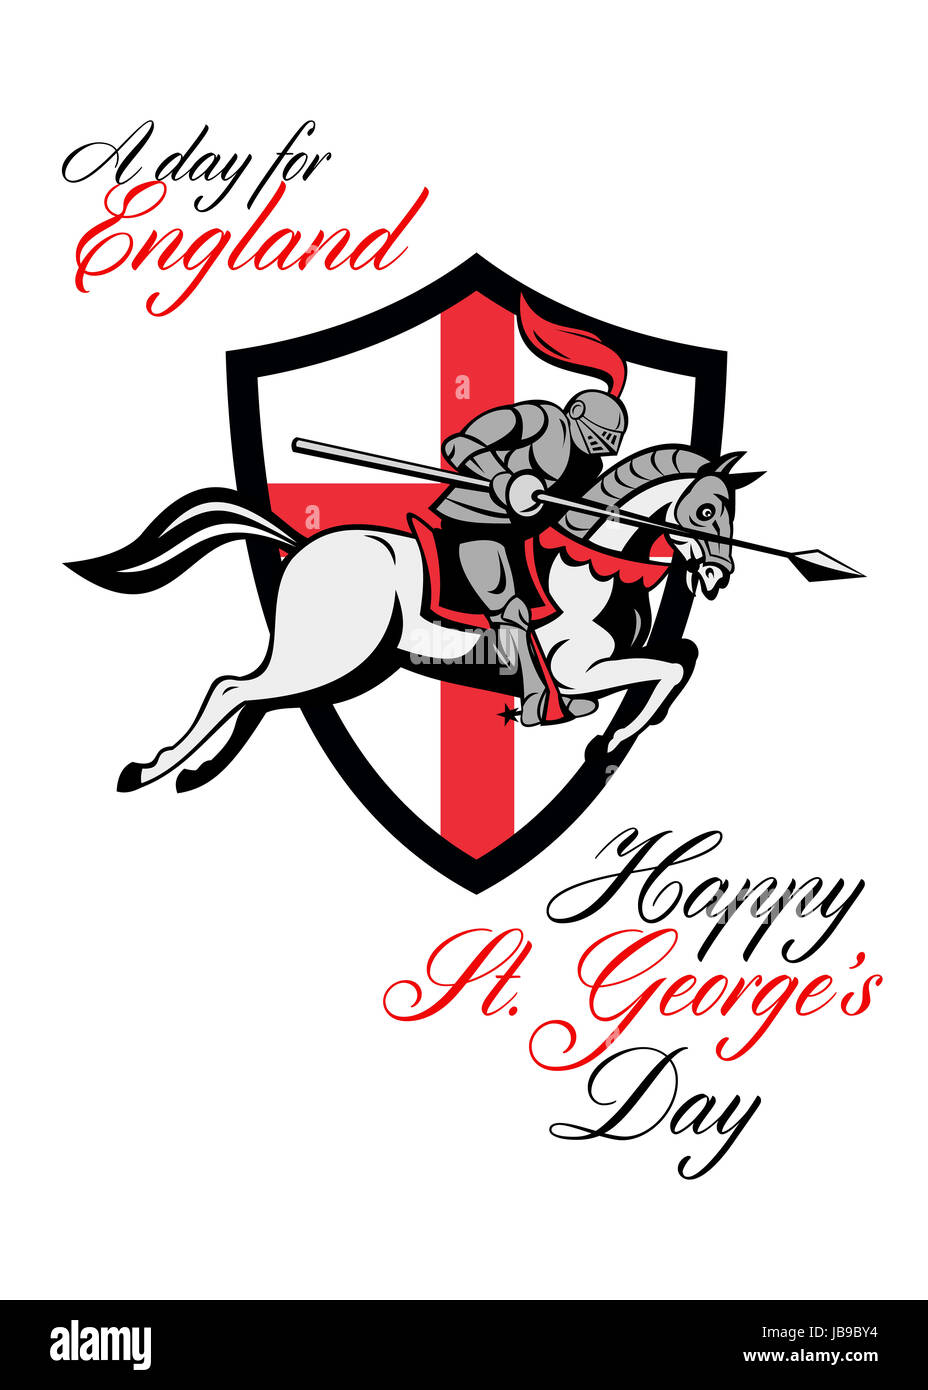 Poster greeting card Illustration of knight in full armor riding a horse armed with lance with England English flag in background done in retro style with words A Day For England Happy St. George's Day. Stock Photo